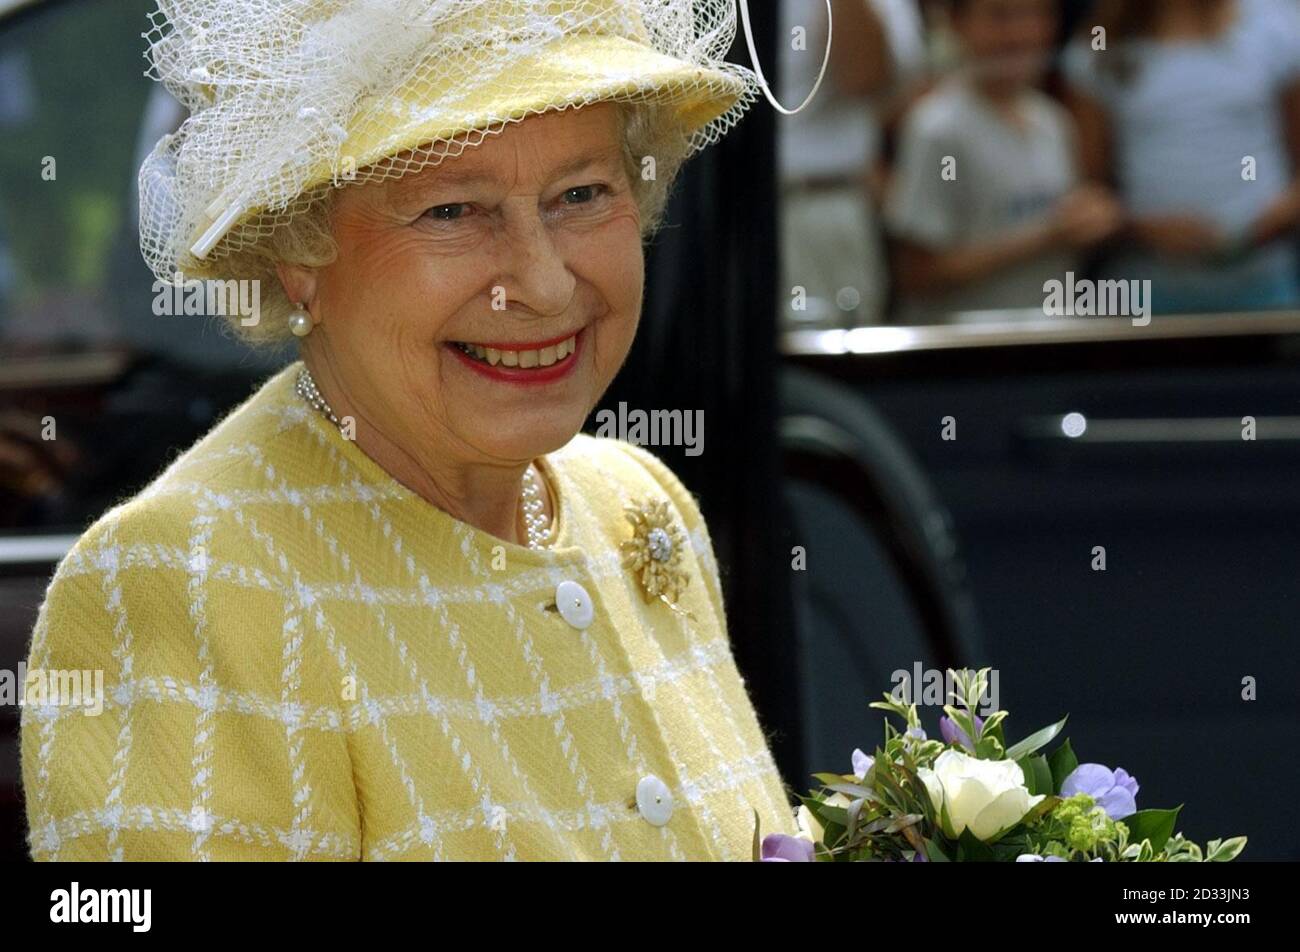 Queen Elizabeth II during a tour of the Royal Botanical Gardens in Kew, London. The Queen visited the gardens today to unveil a plaque commemorating the attraction's status as a World Heritage Site. Stock Photo